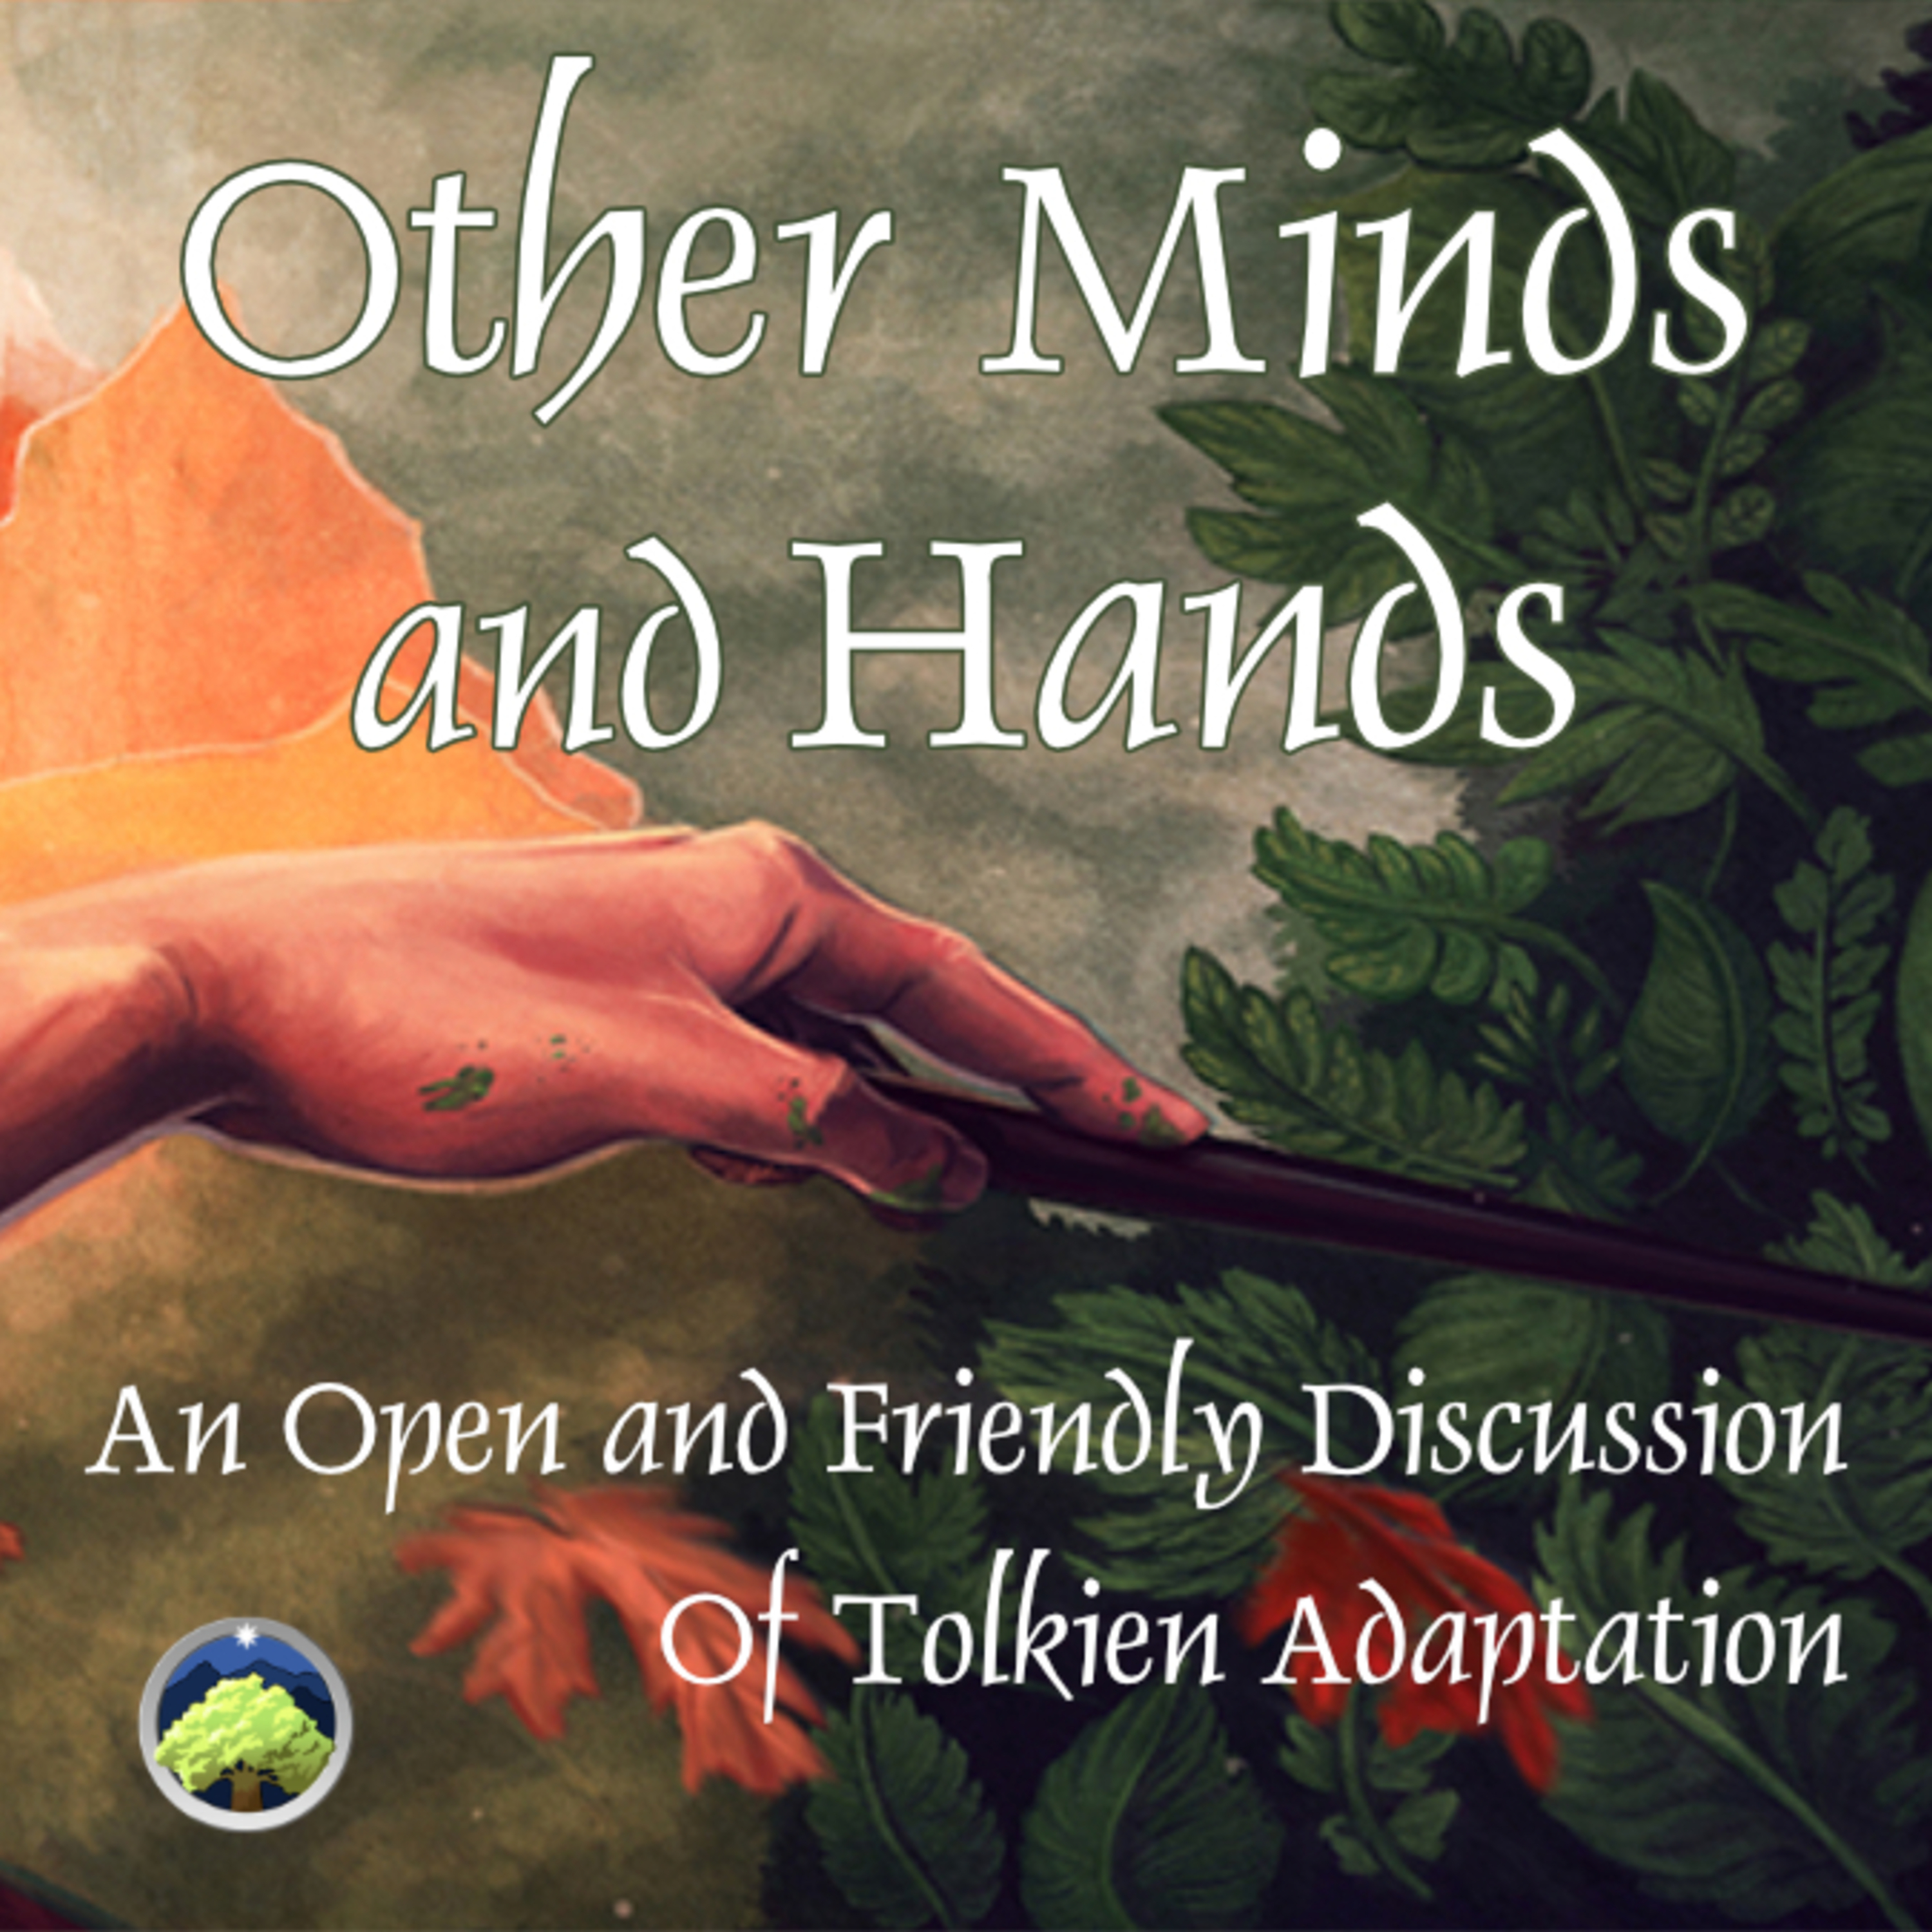 547: Other Minds and Hands, Episode 57